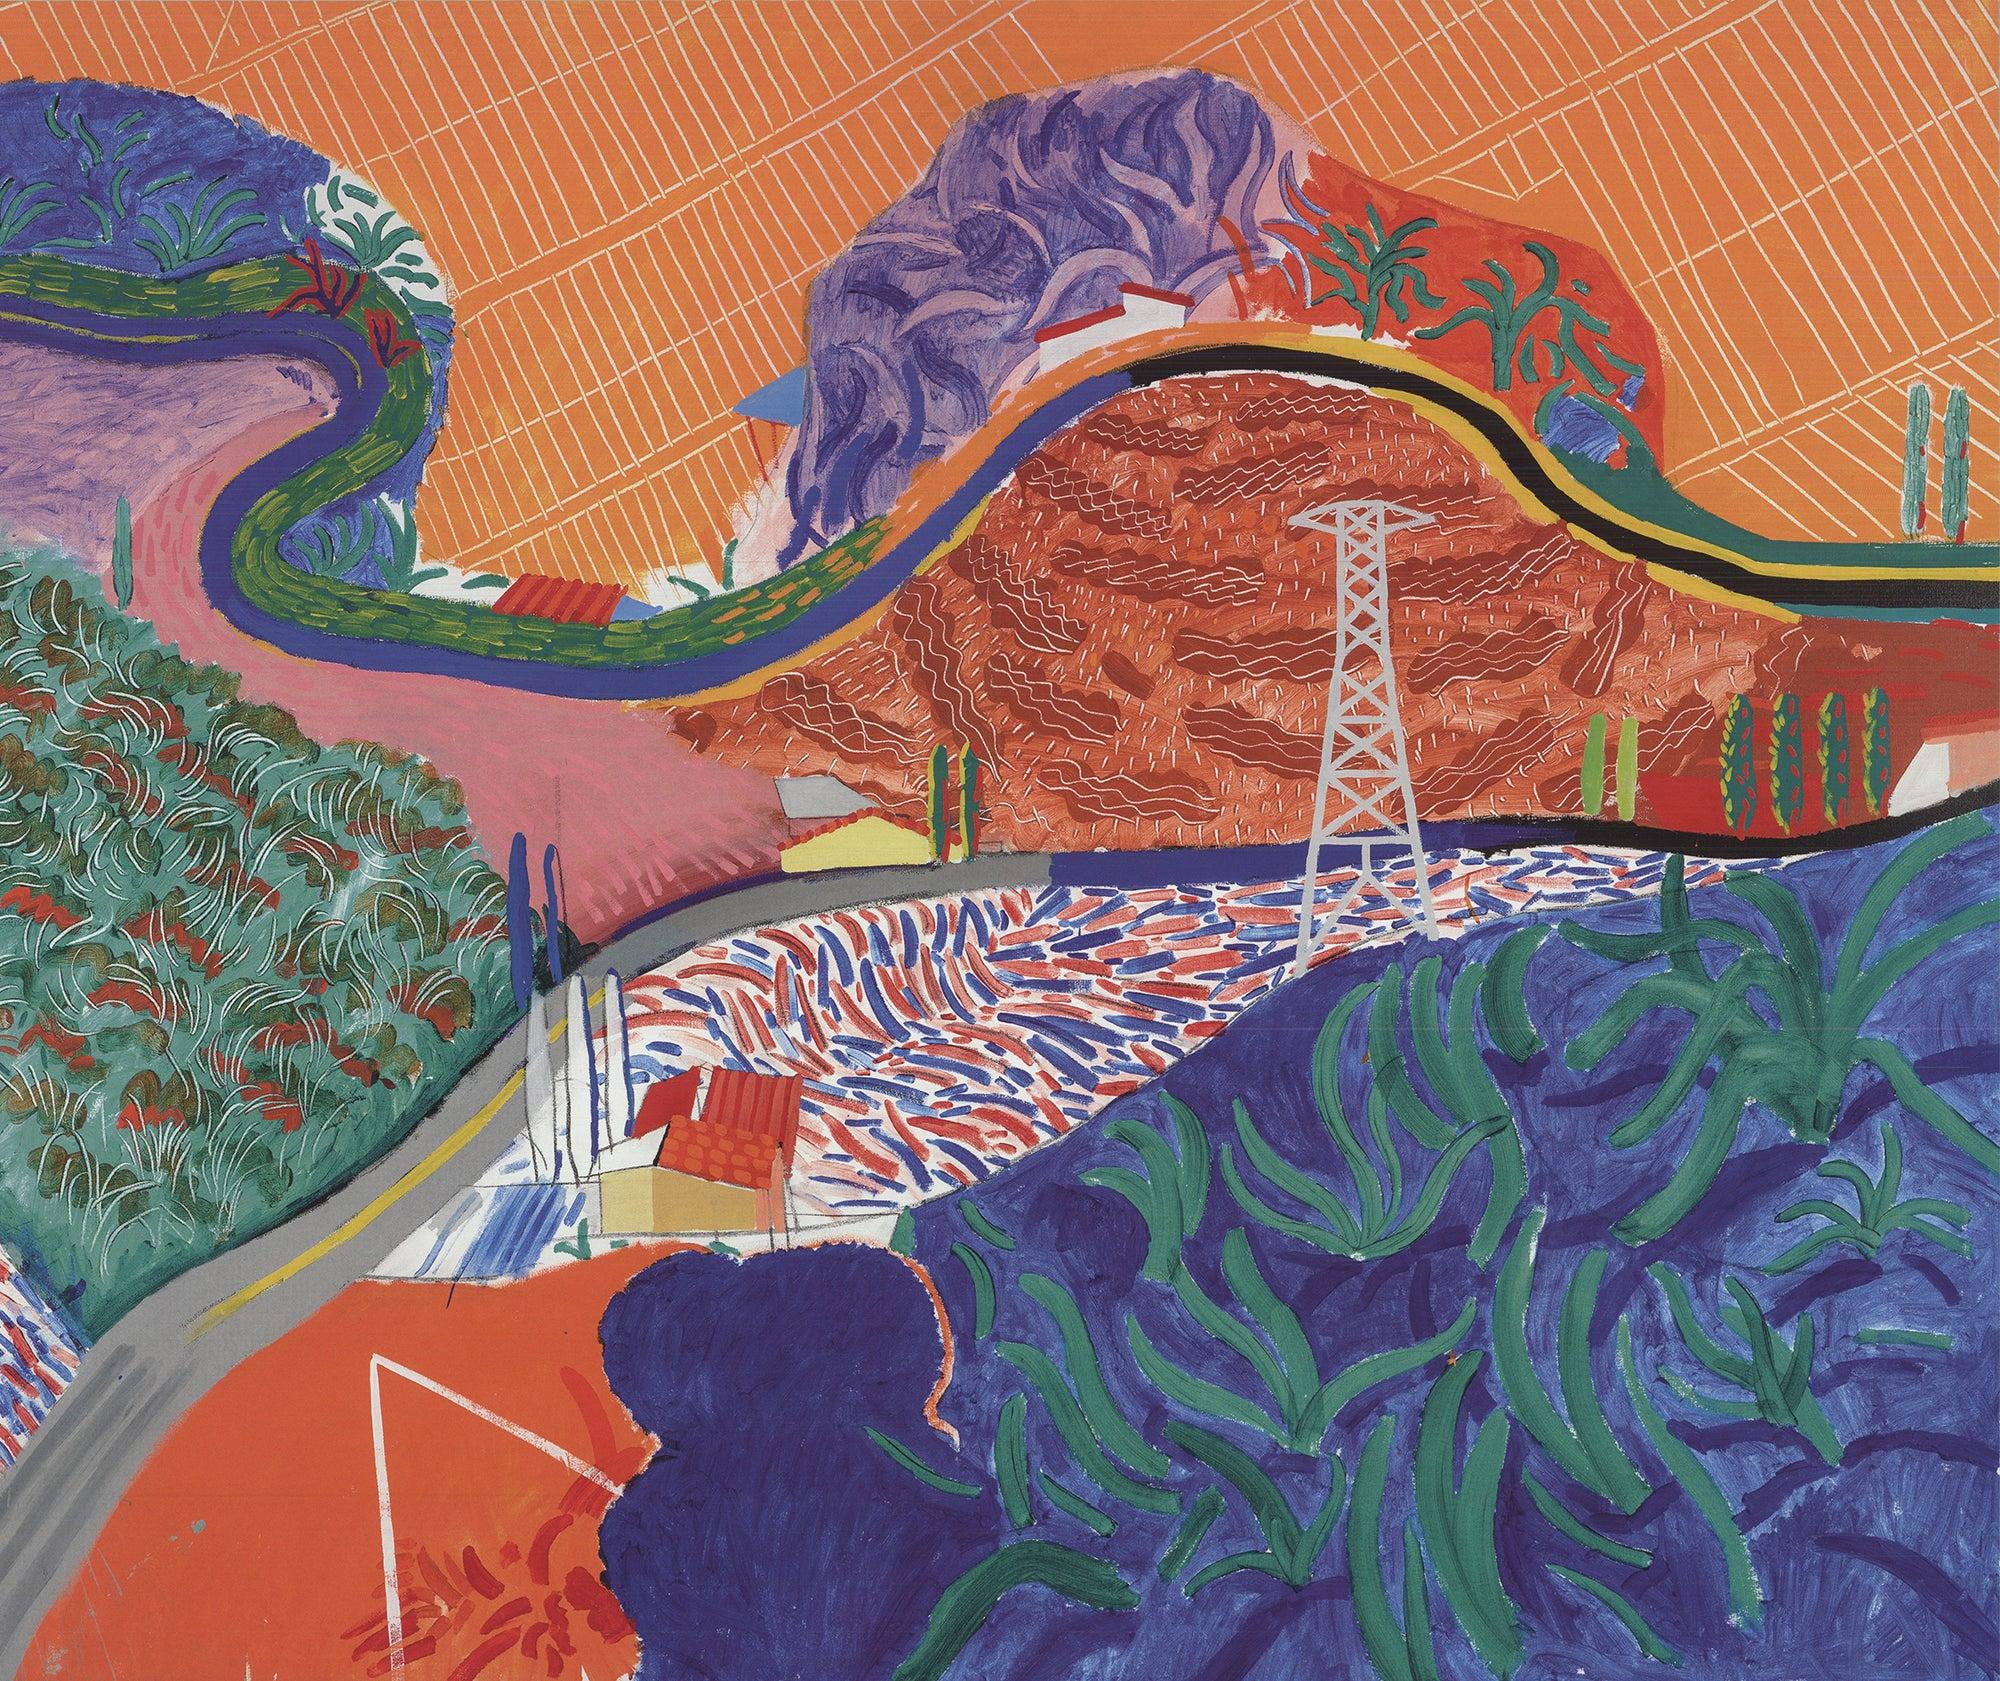 David Hockney „Mulholland Drive: The Road to the Studio“ 2021- Offset-Lithographie im Angebot 2